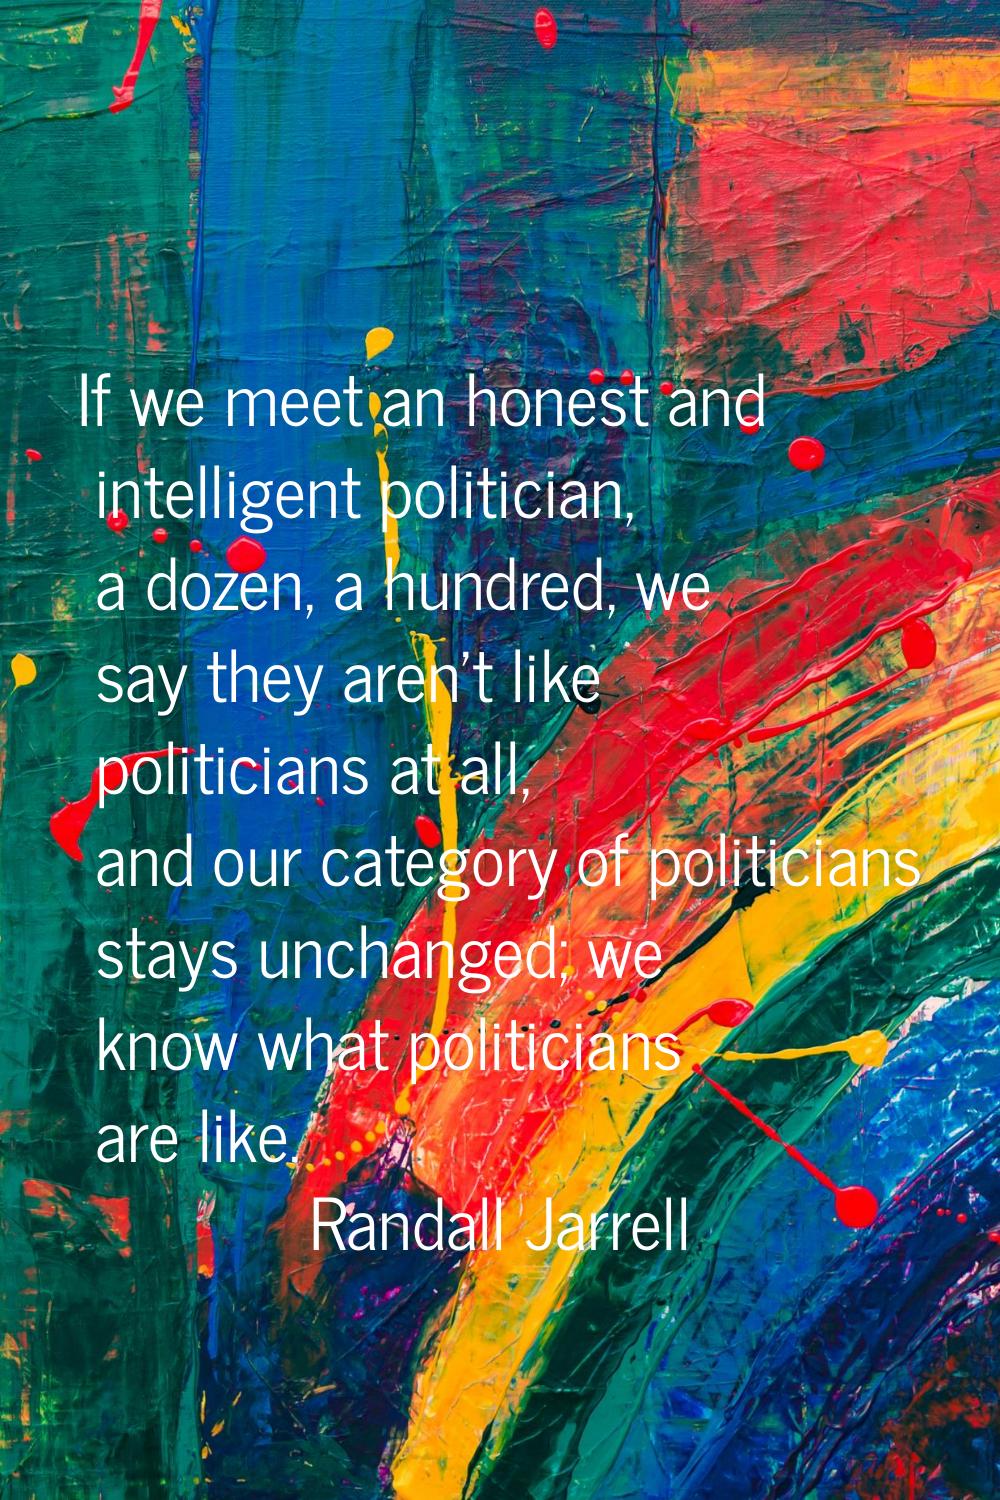 If we meet an honest and intelligent politician, a dozen, a hundred, we say they aren't like politi